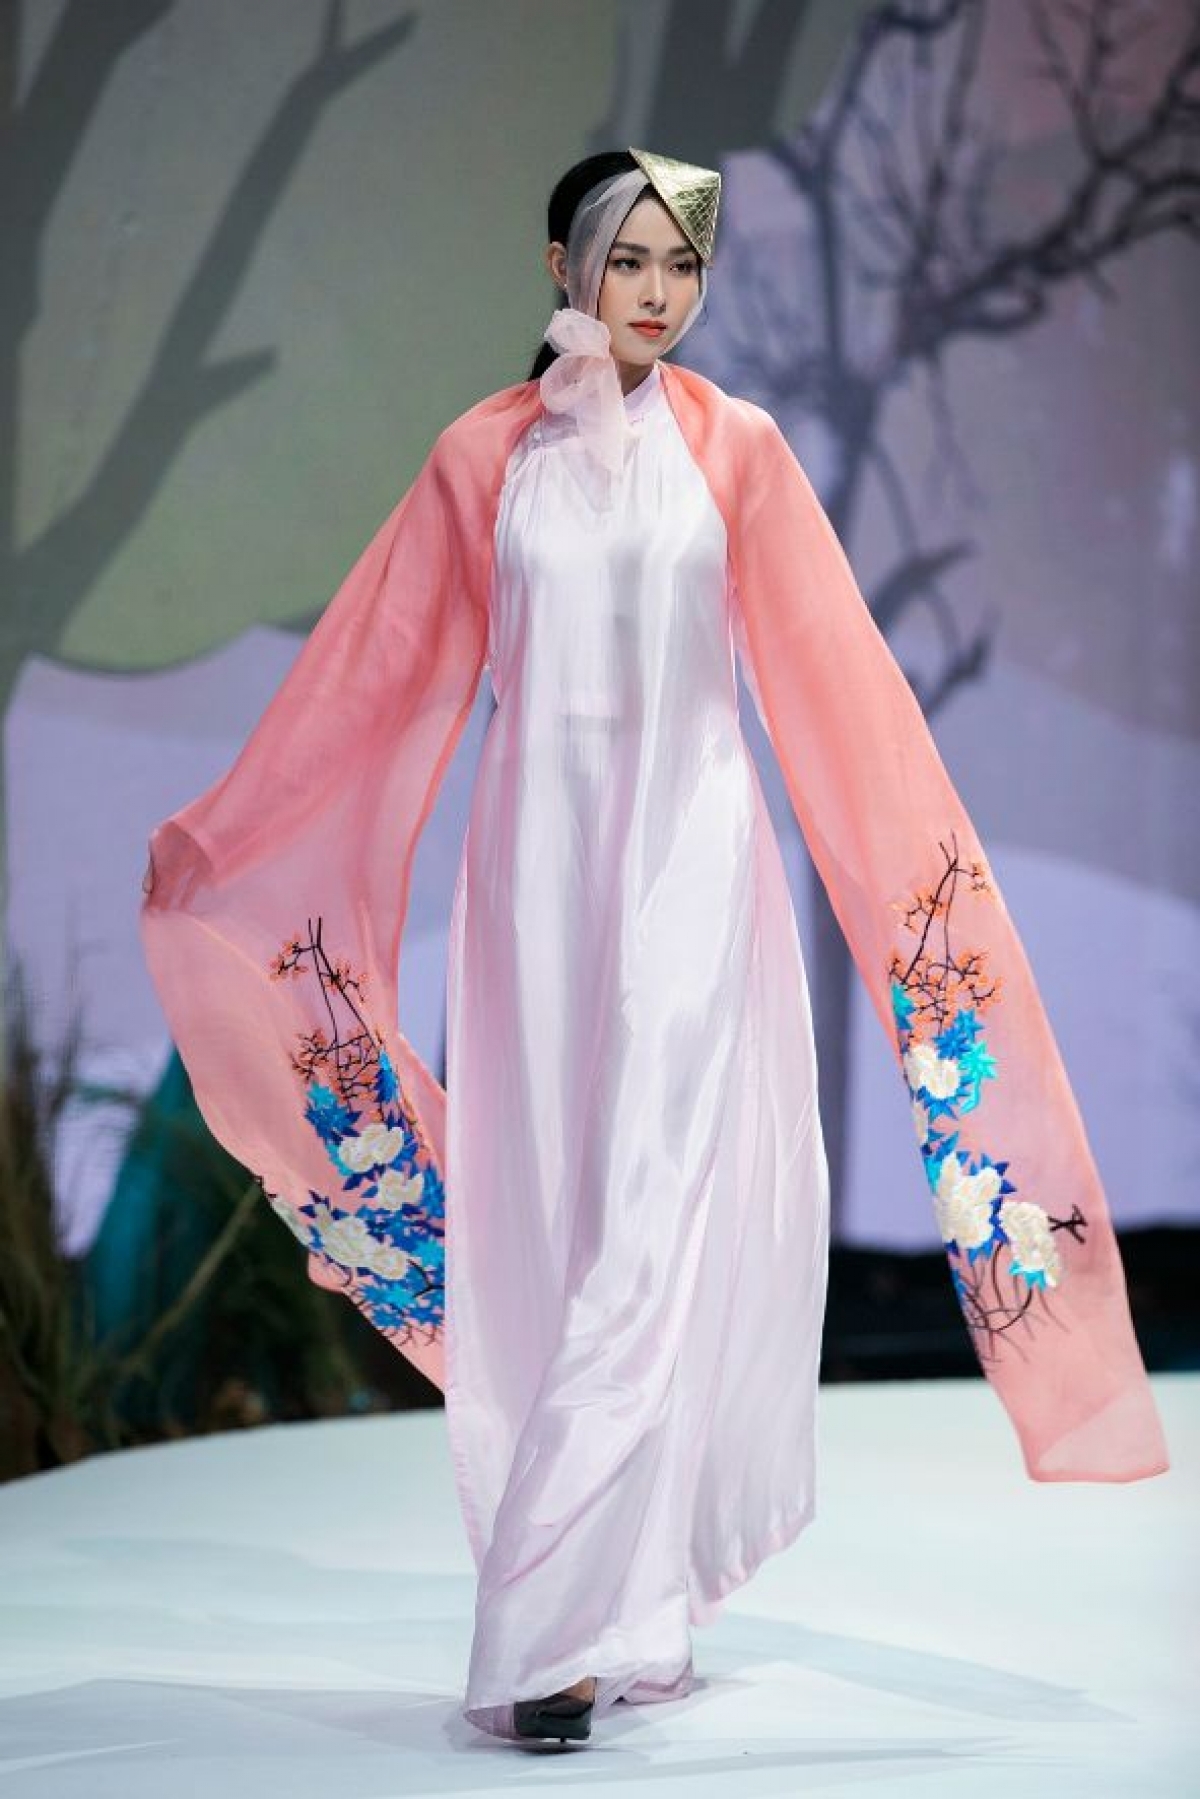 An Ao Dai collection by designer Vu Viet Ha opens the fashion show, with actress Diep Bao Ngoc serving as vedette for the occasion.